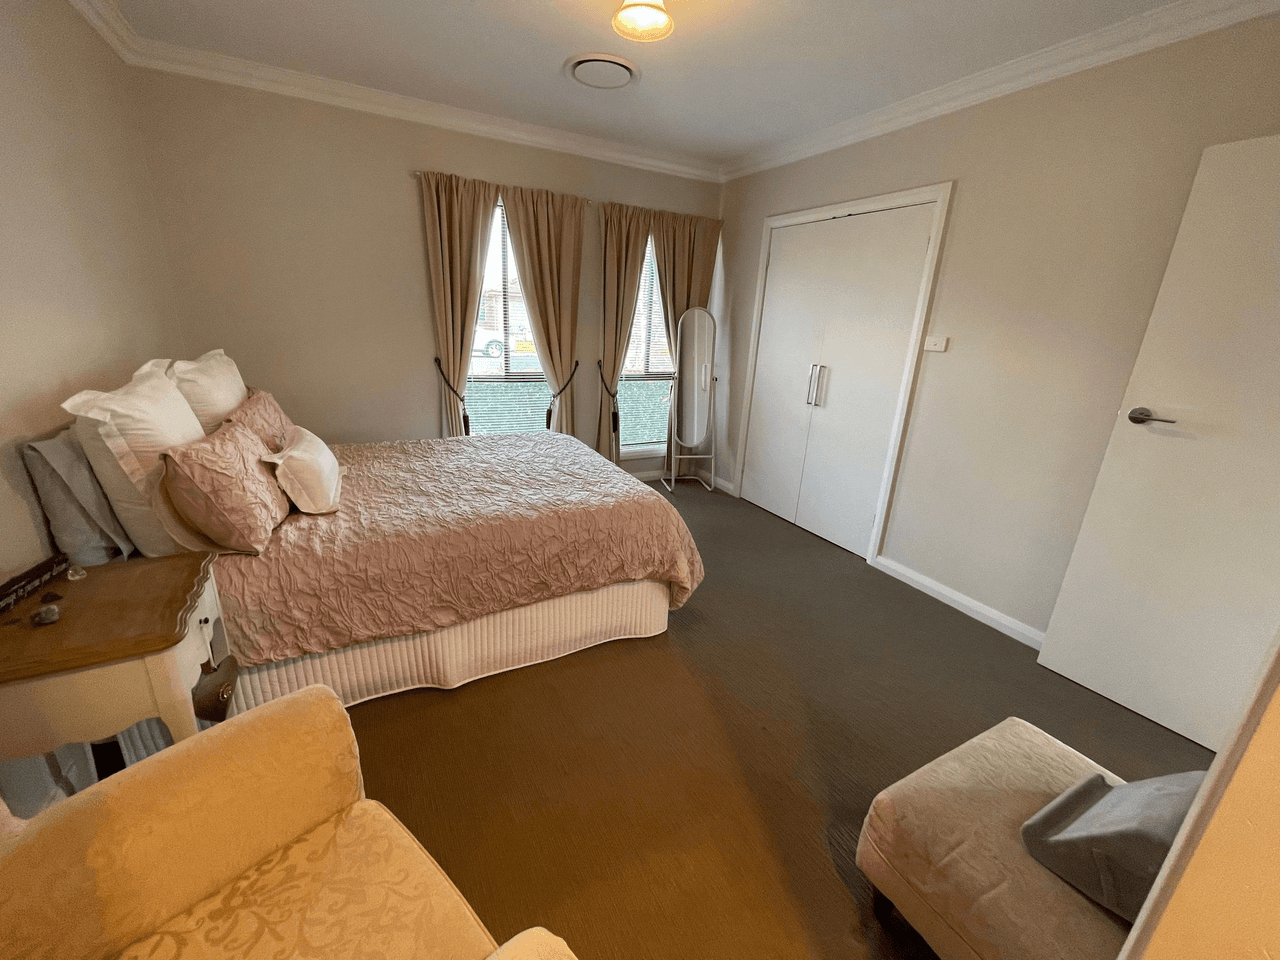 25 Calabria Road, GRIFFITH, NSW 2680